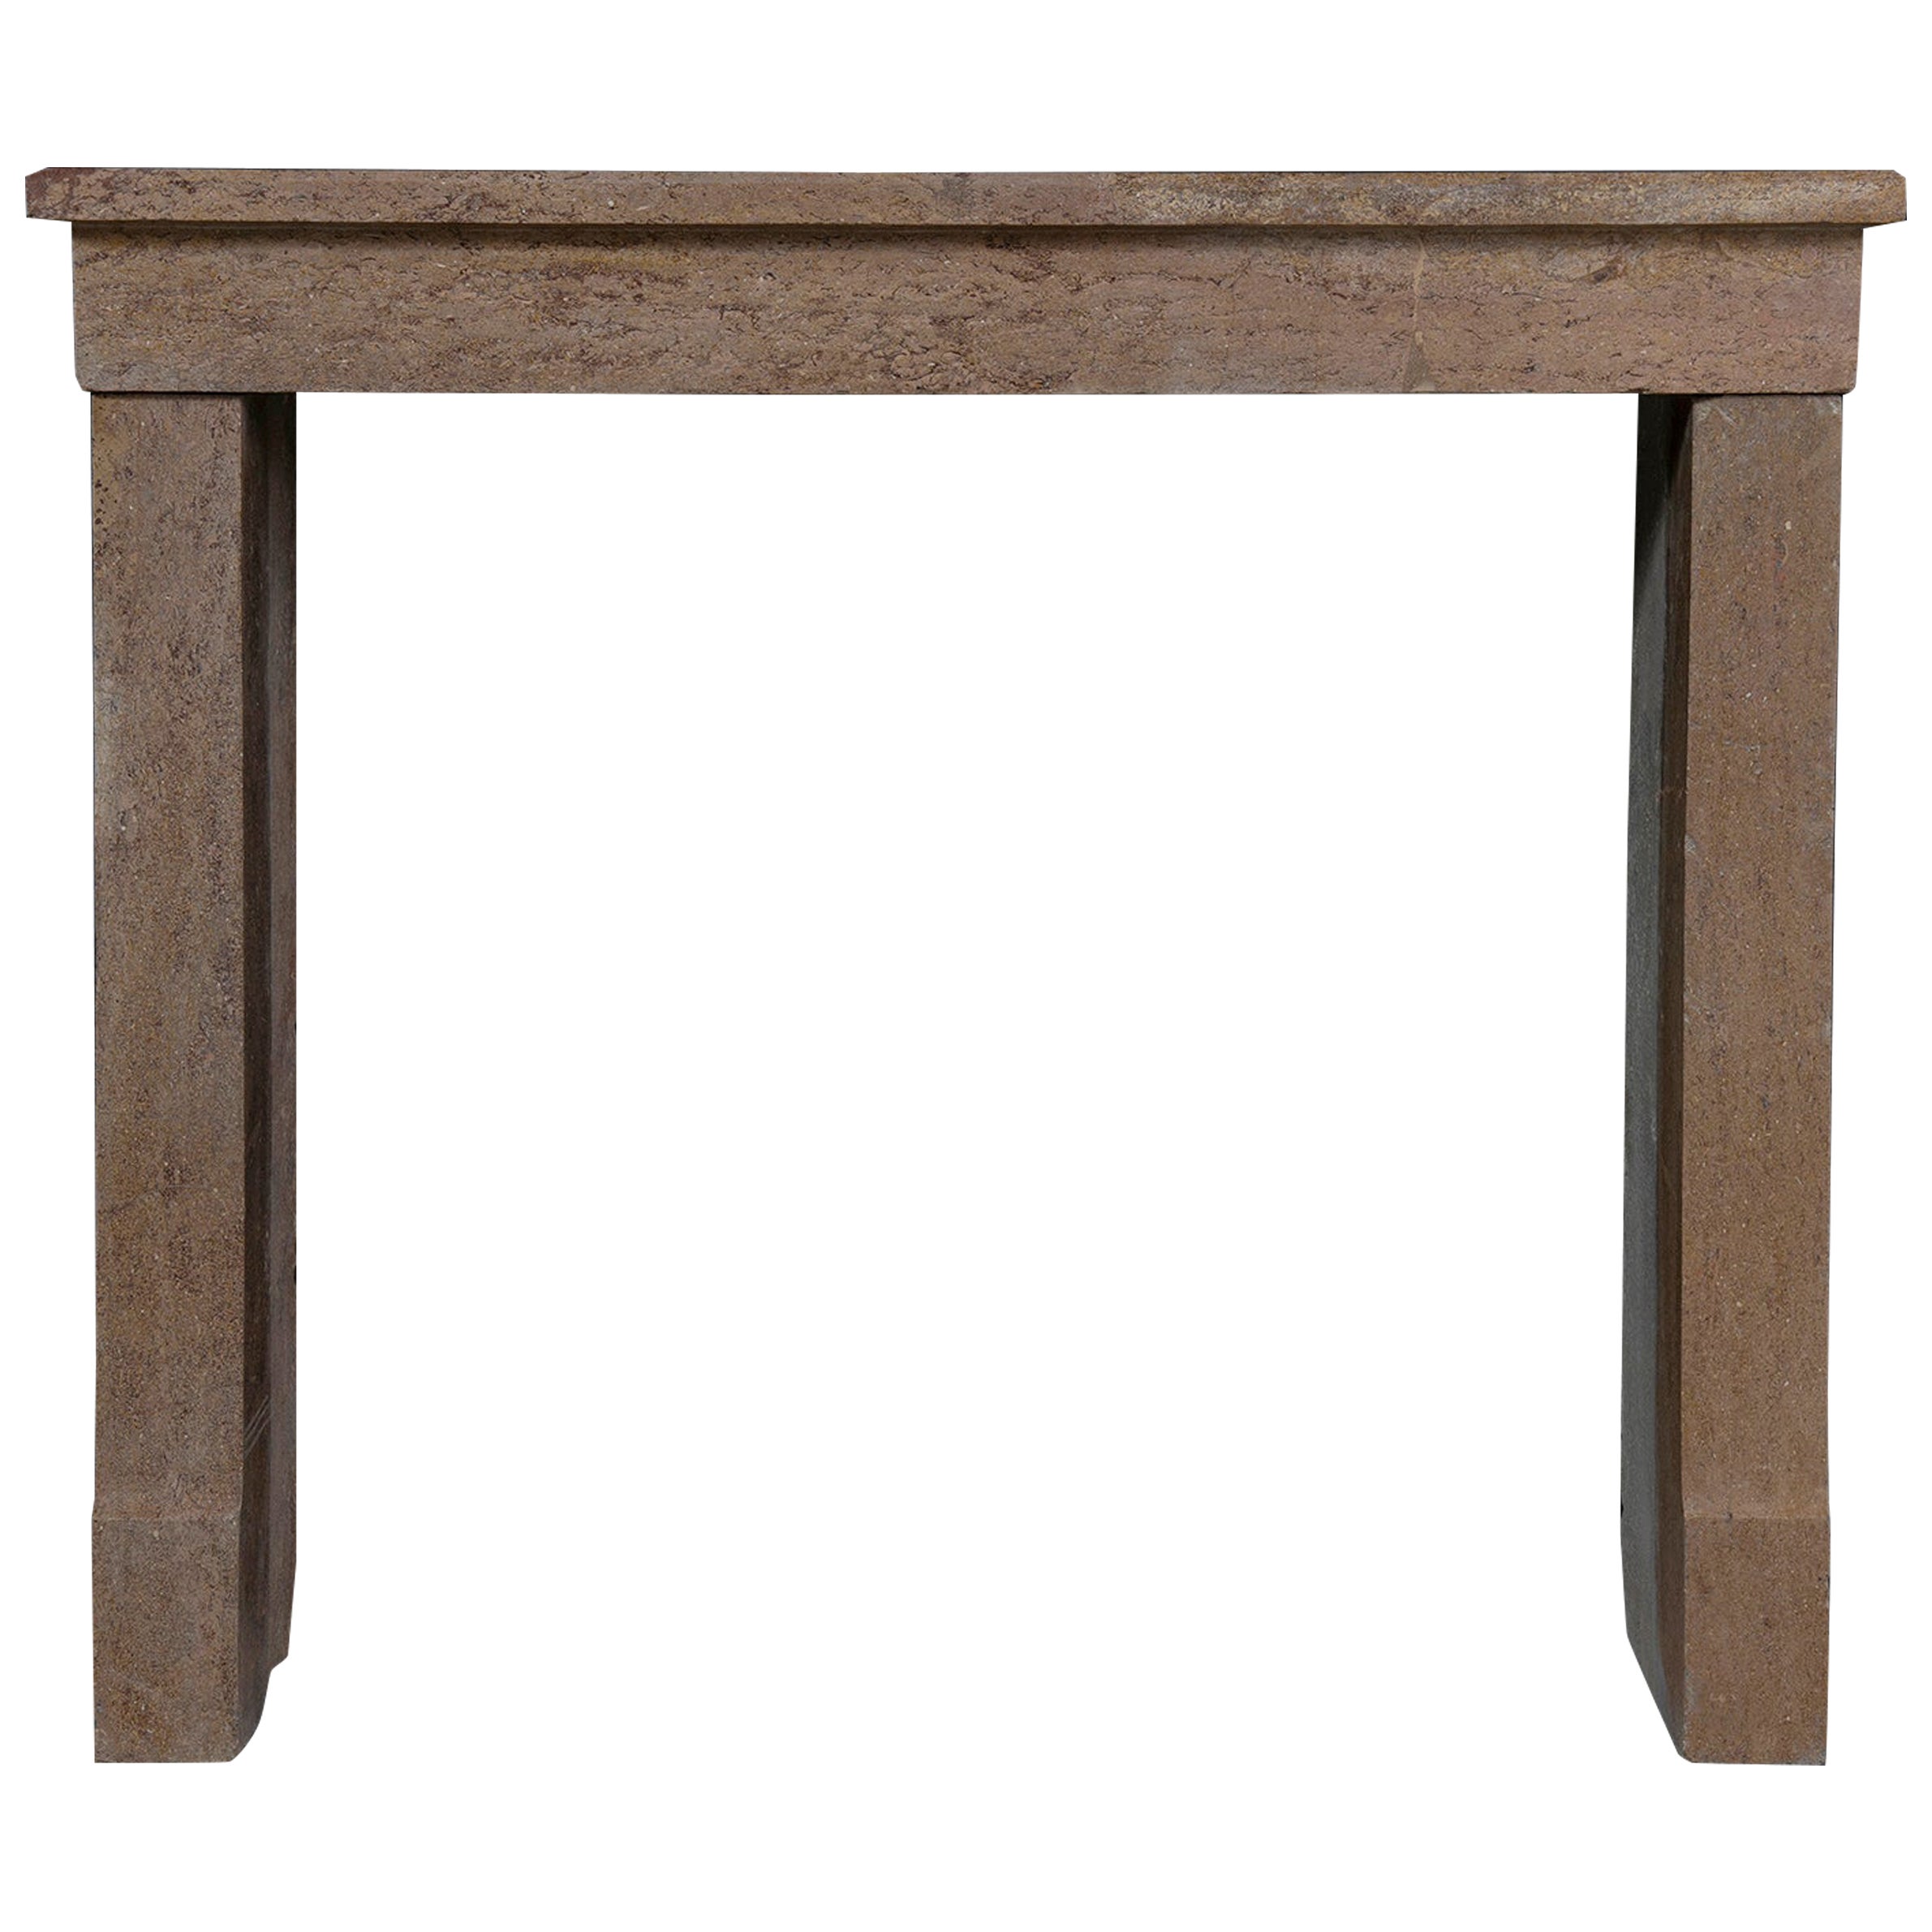 Petite French Fireplace Mantel For Sale